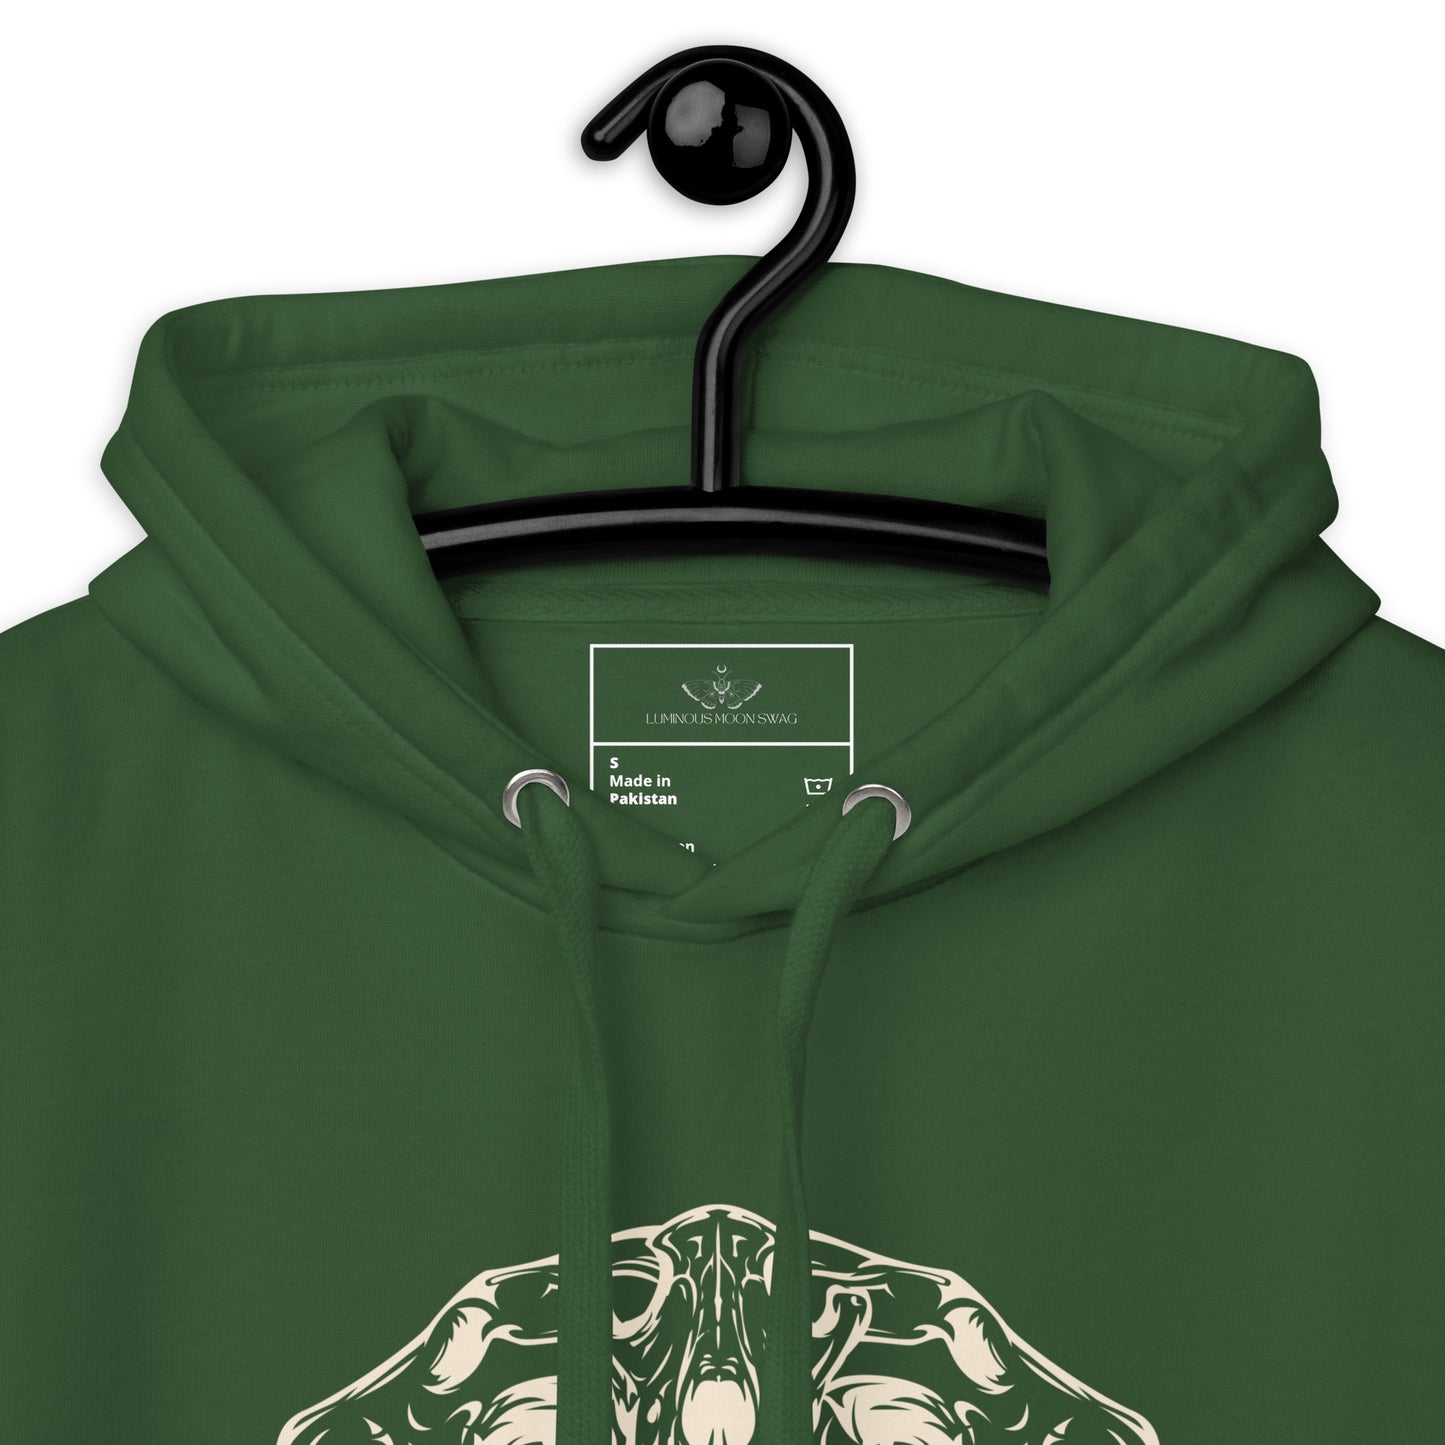 River Dawg Photography Unisex Hoodie